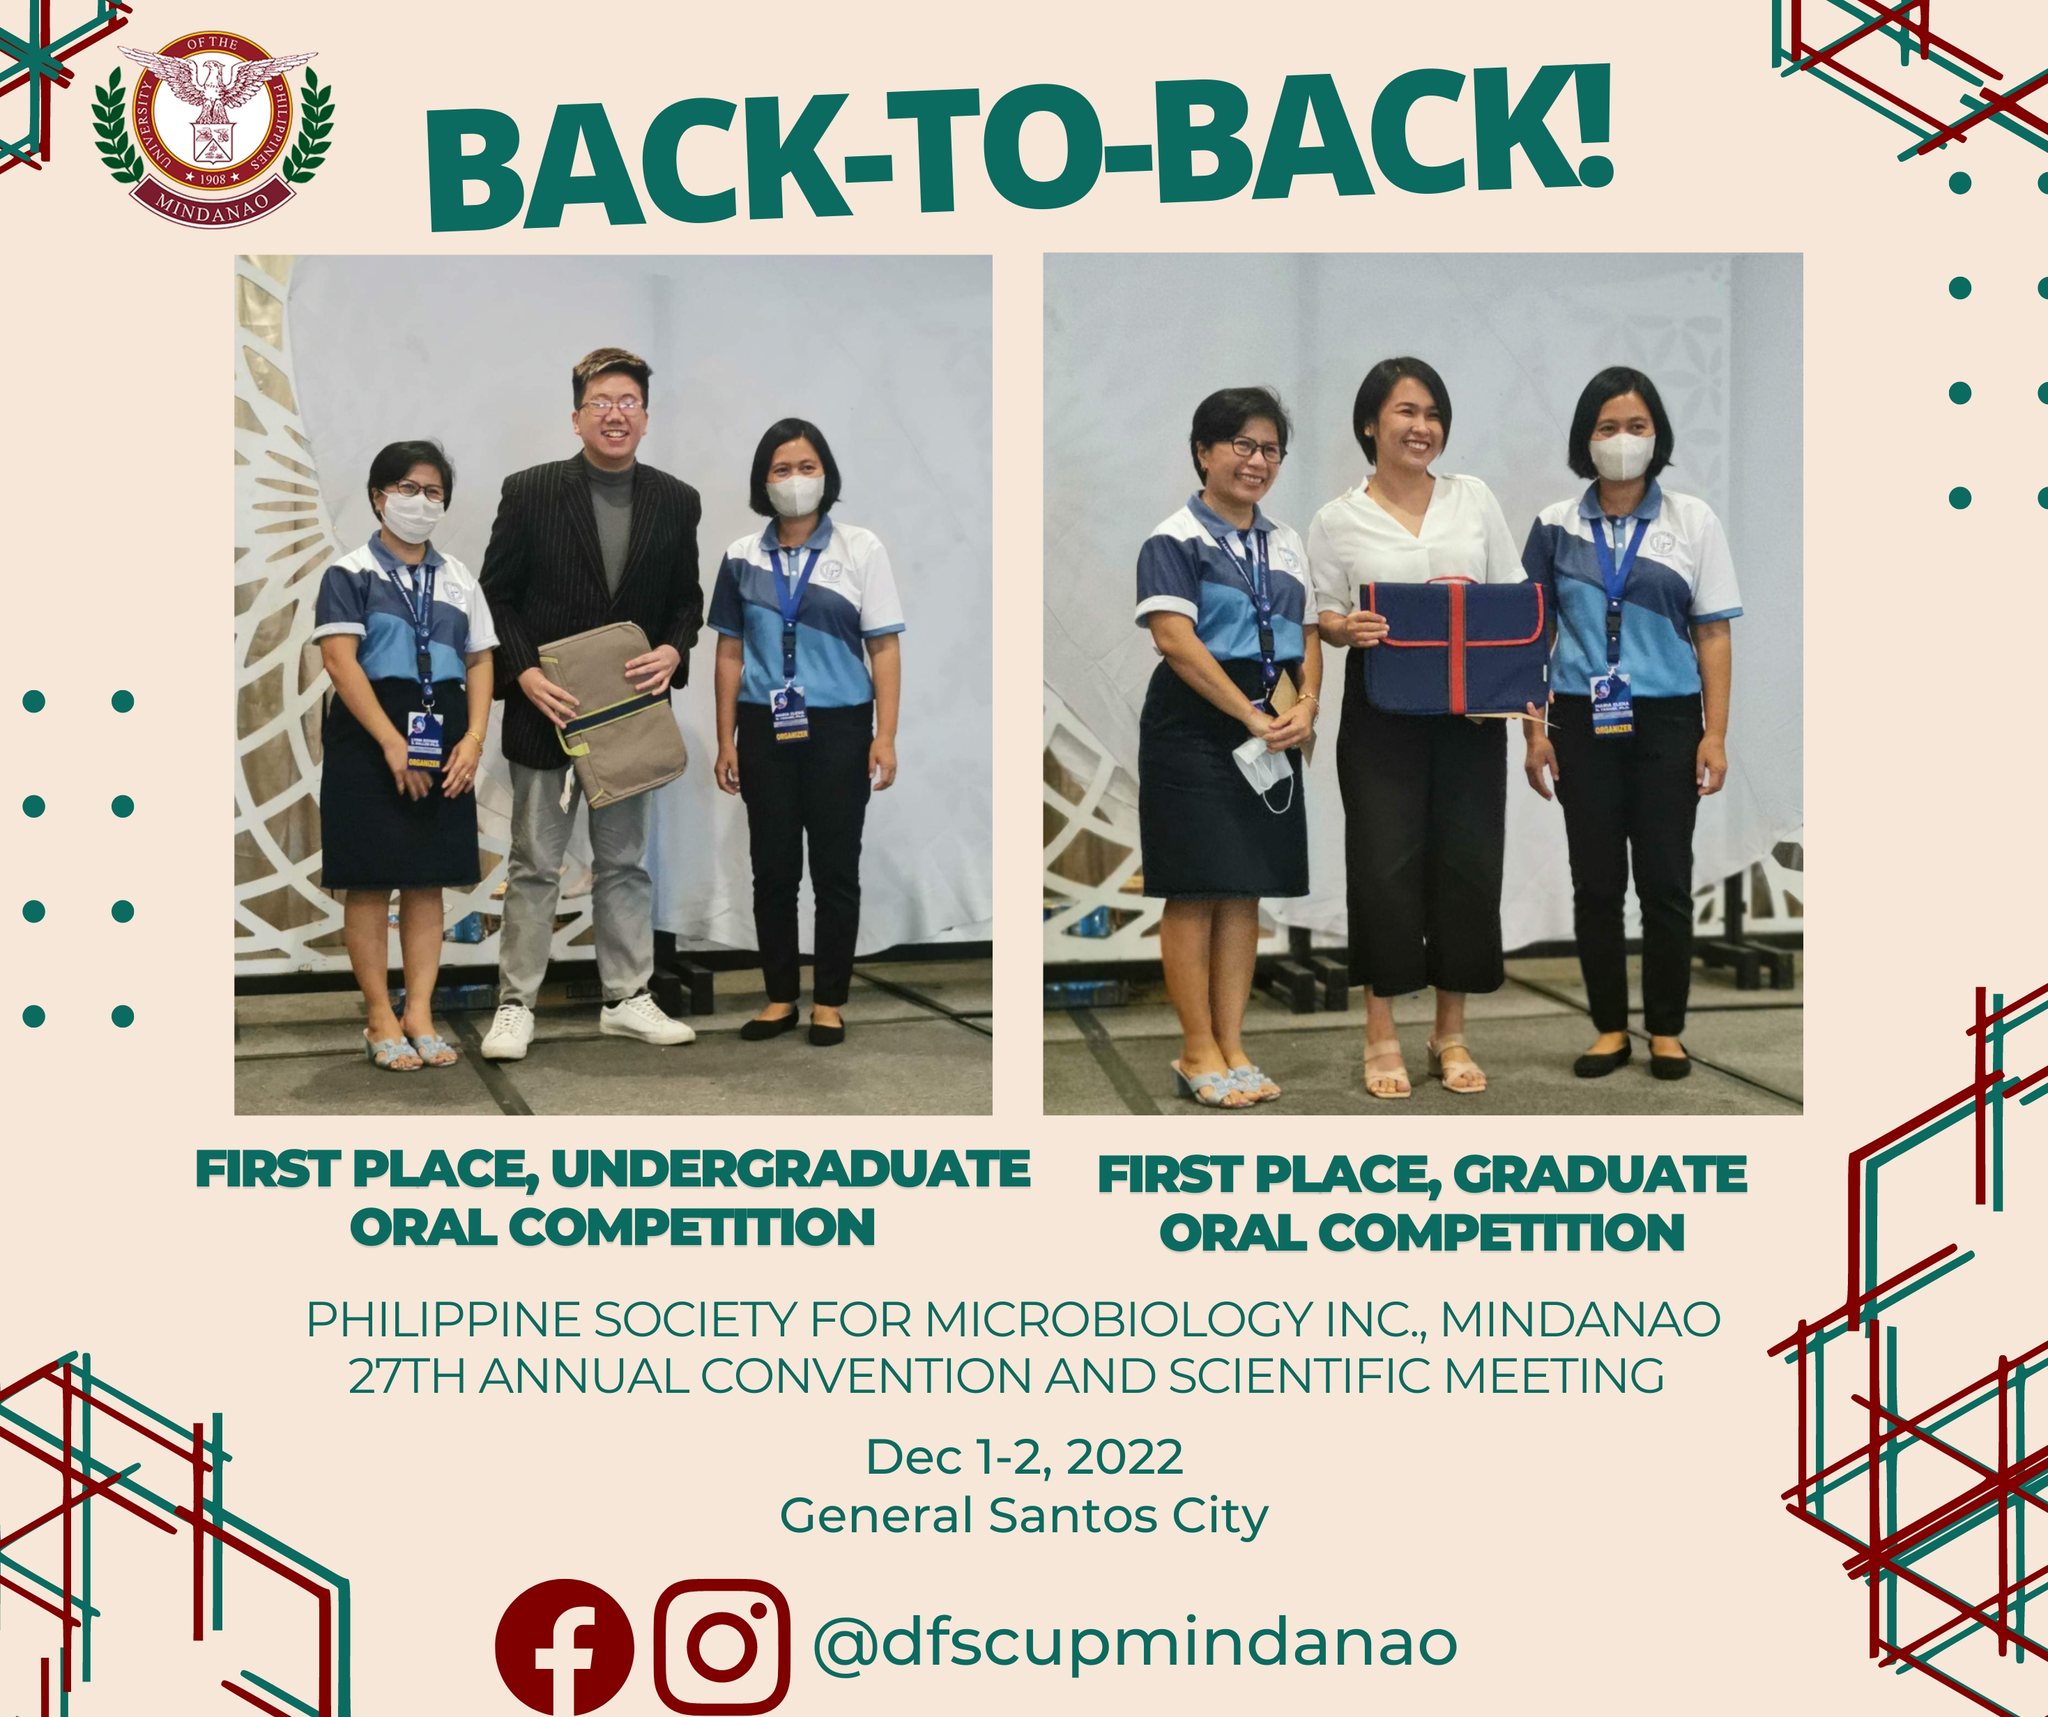 Philippine Society for Microbiology, Inc. Mindanao 27th Annual Convention and Scientific Meeting